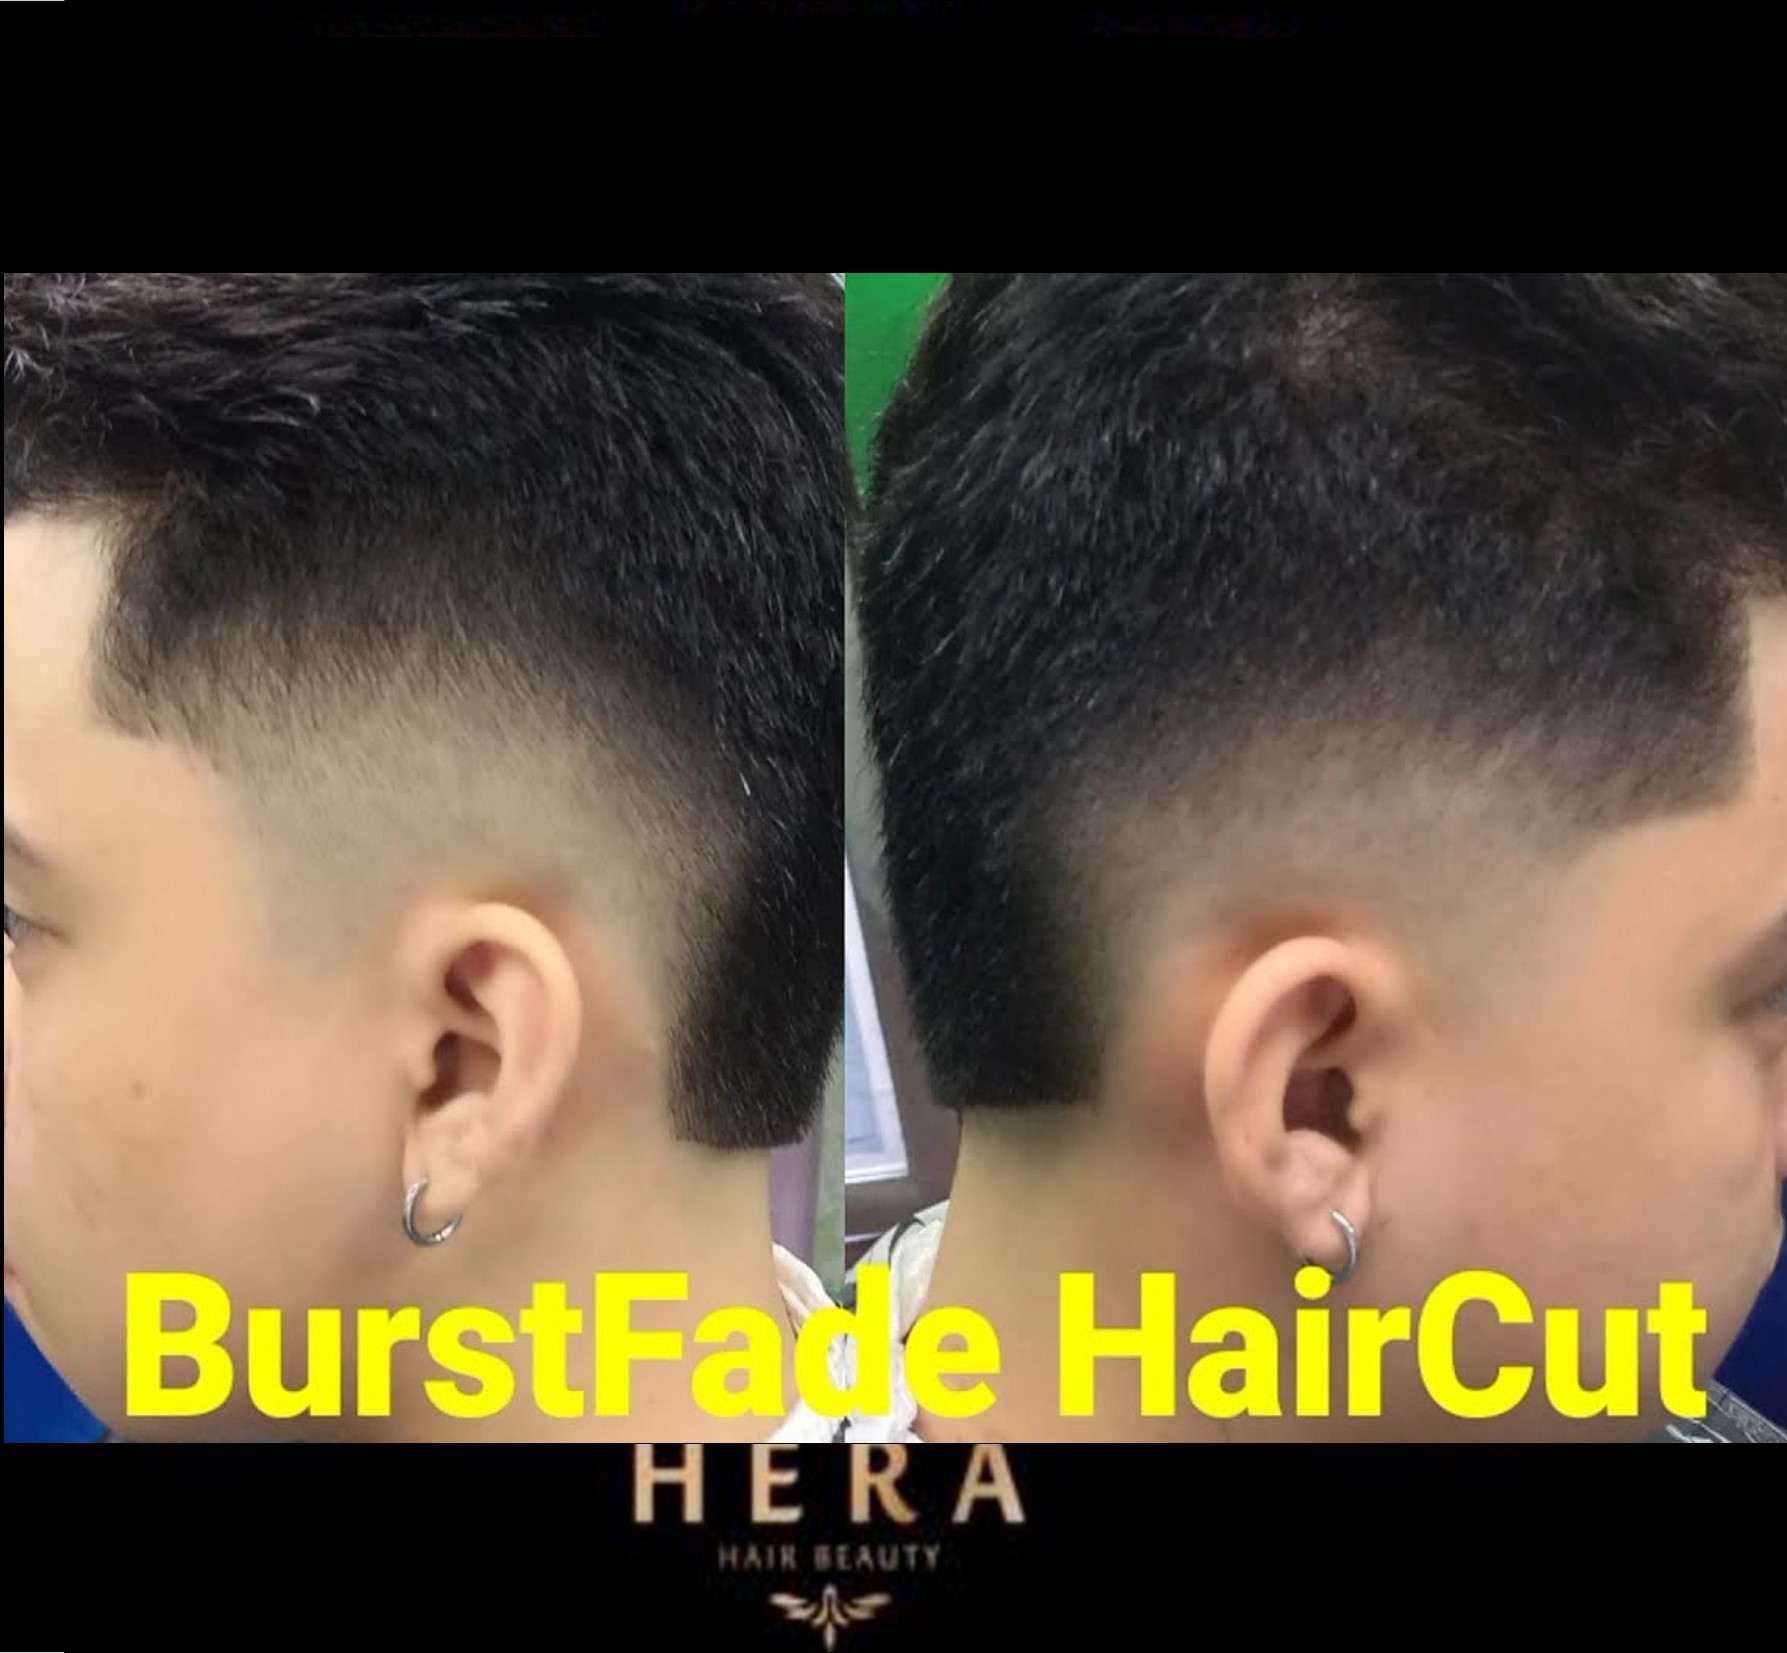 Drop Fade Haircuts: 46 Awesome Ways for Guys to Get This Fade